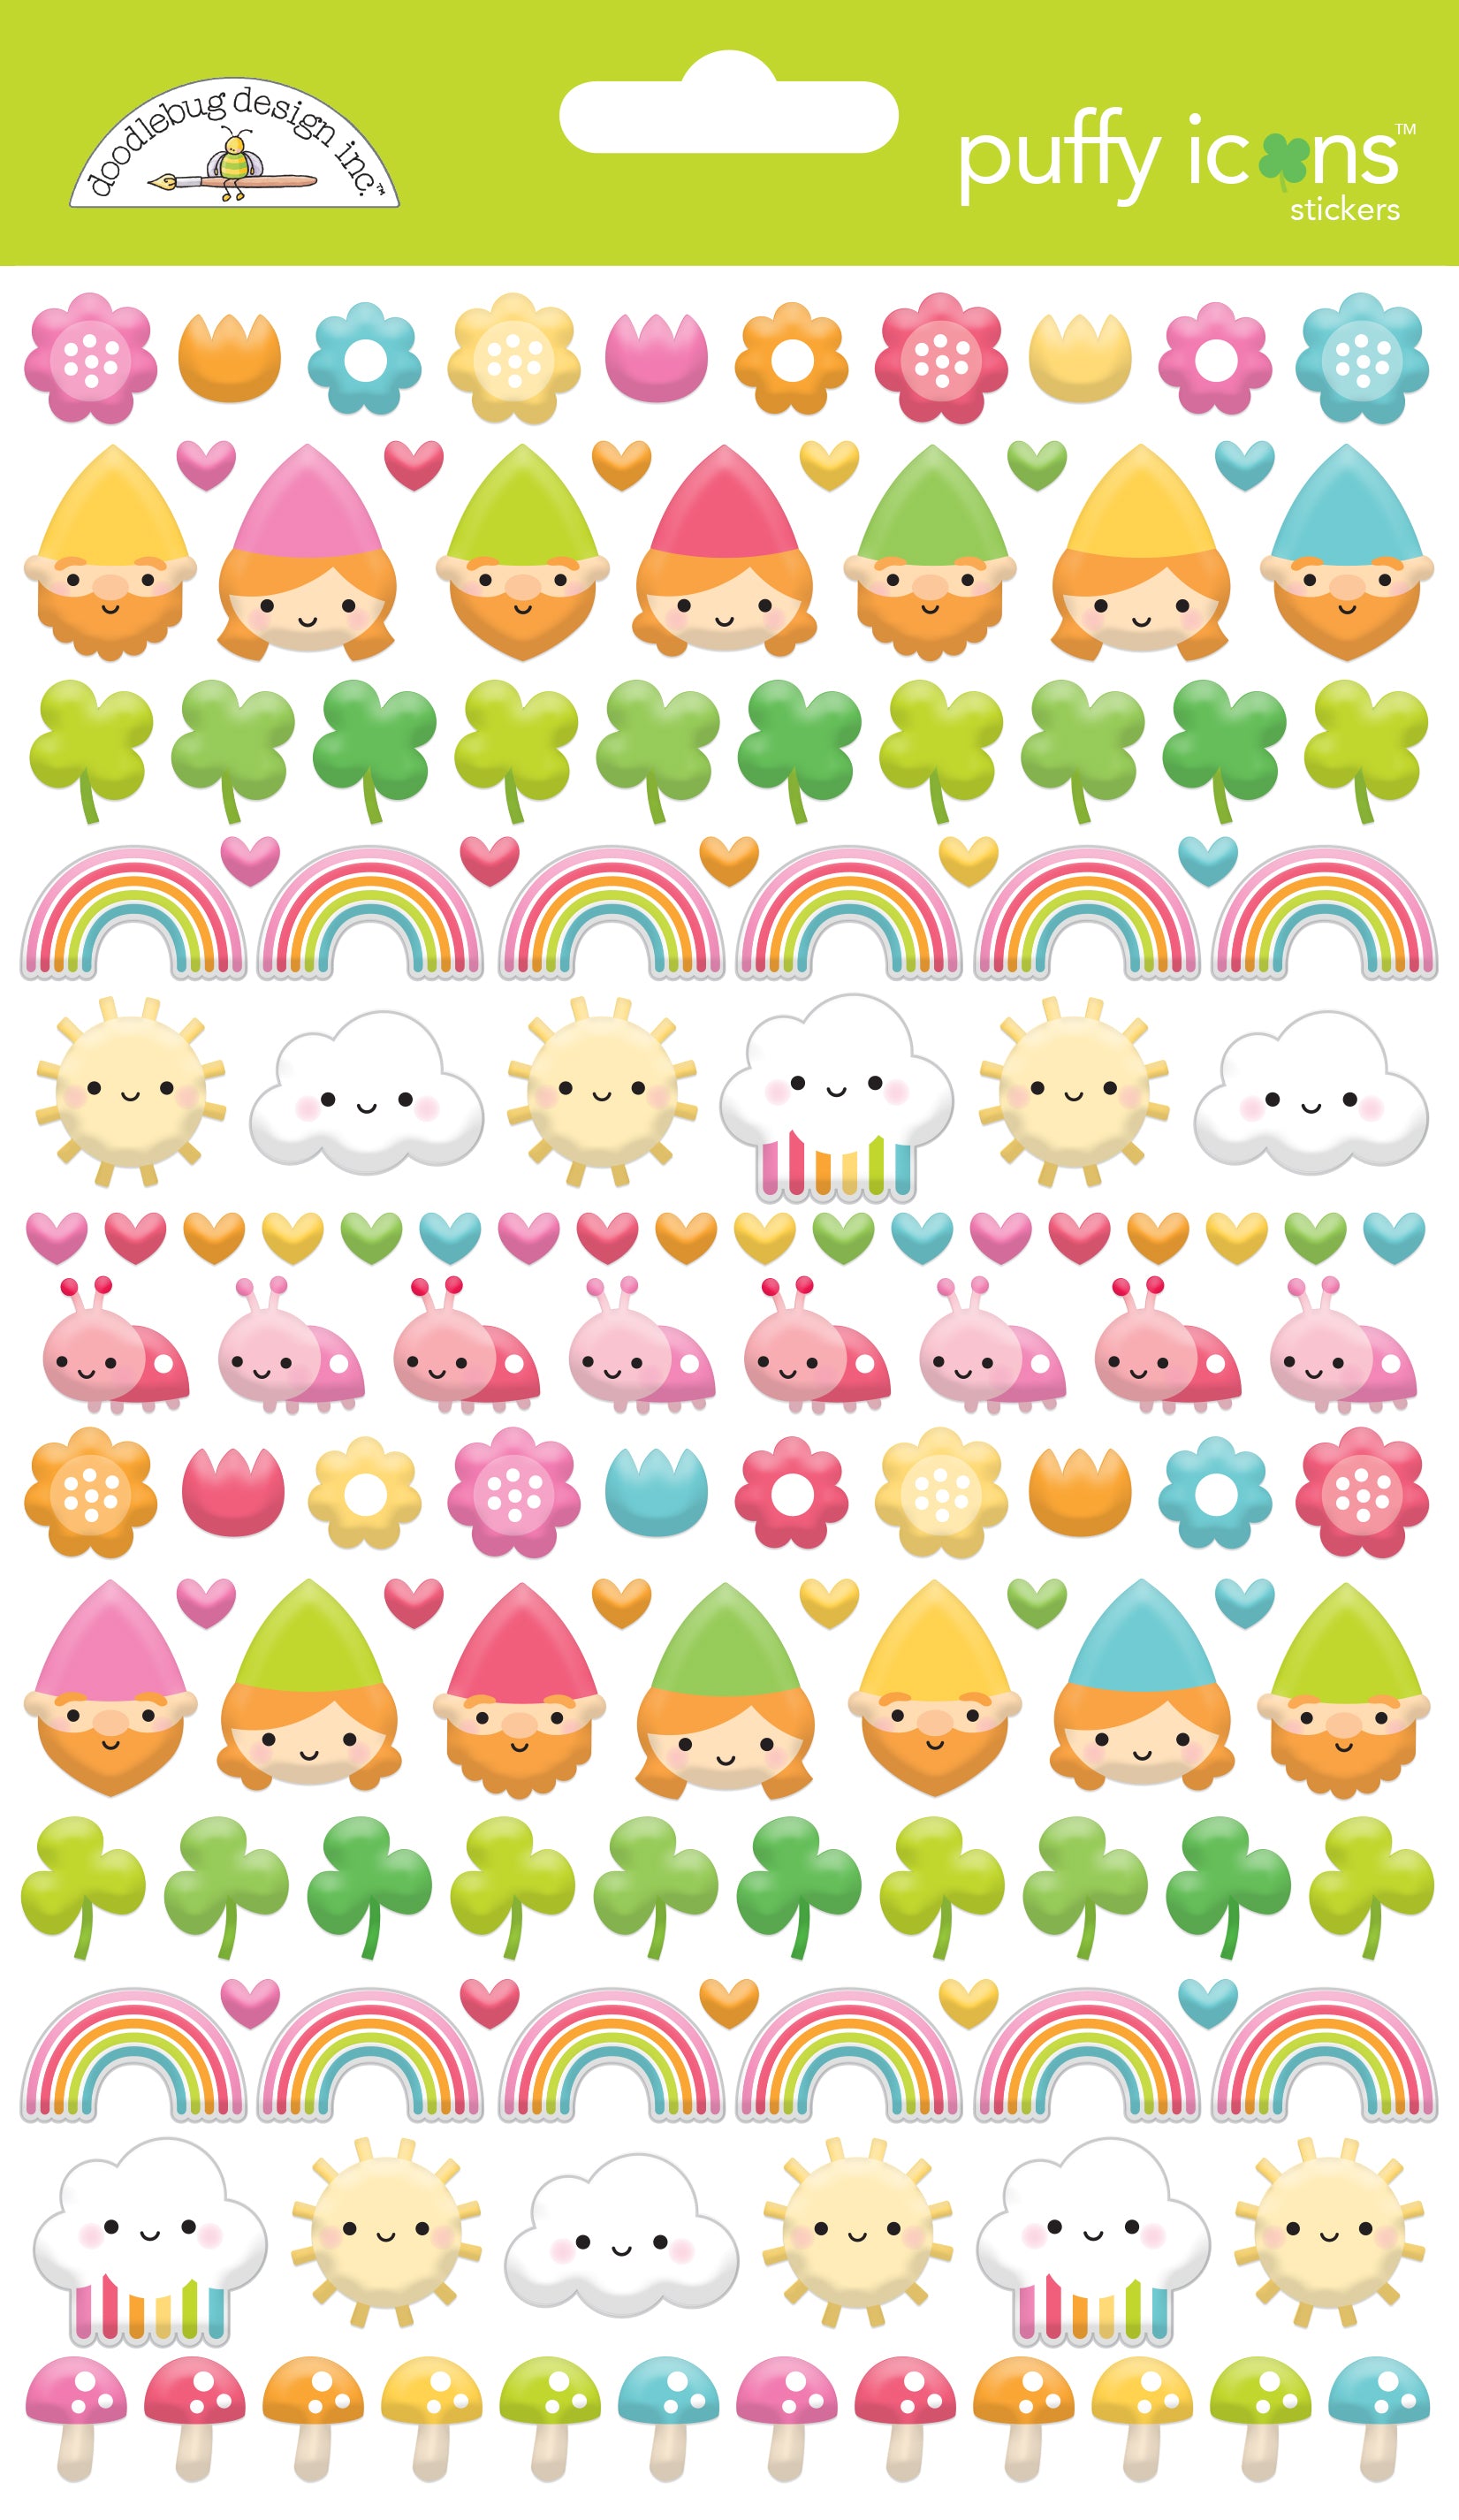 Over the Rainbow St Patricks Day Stickers